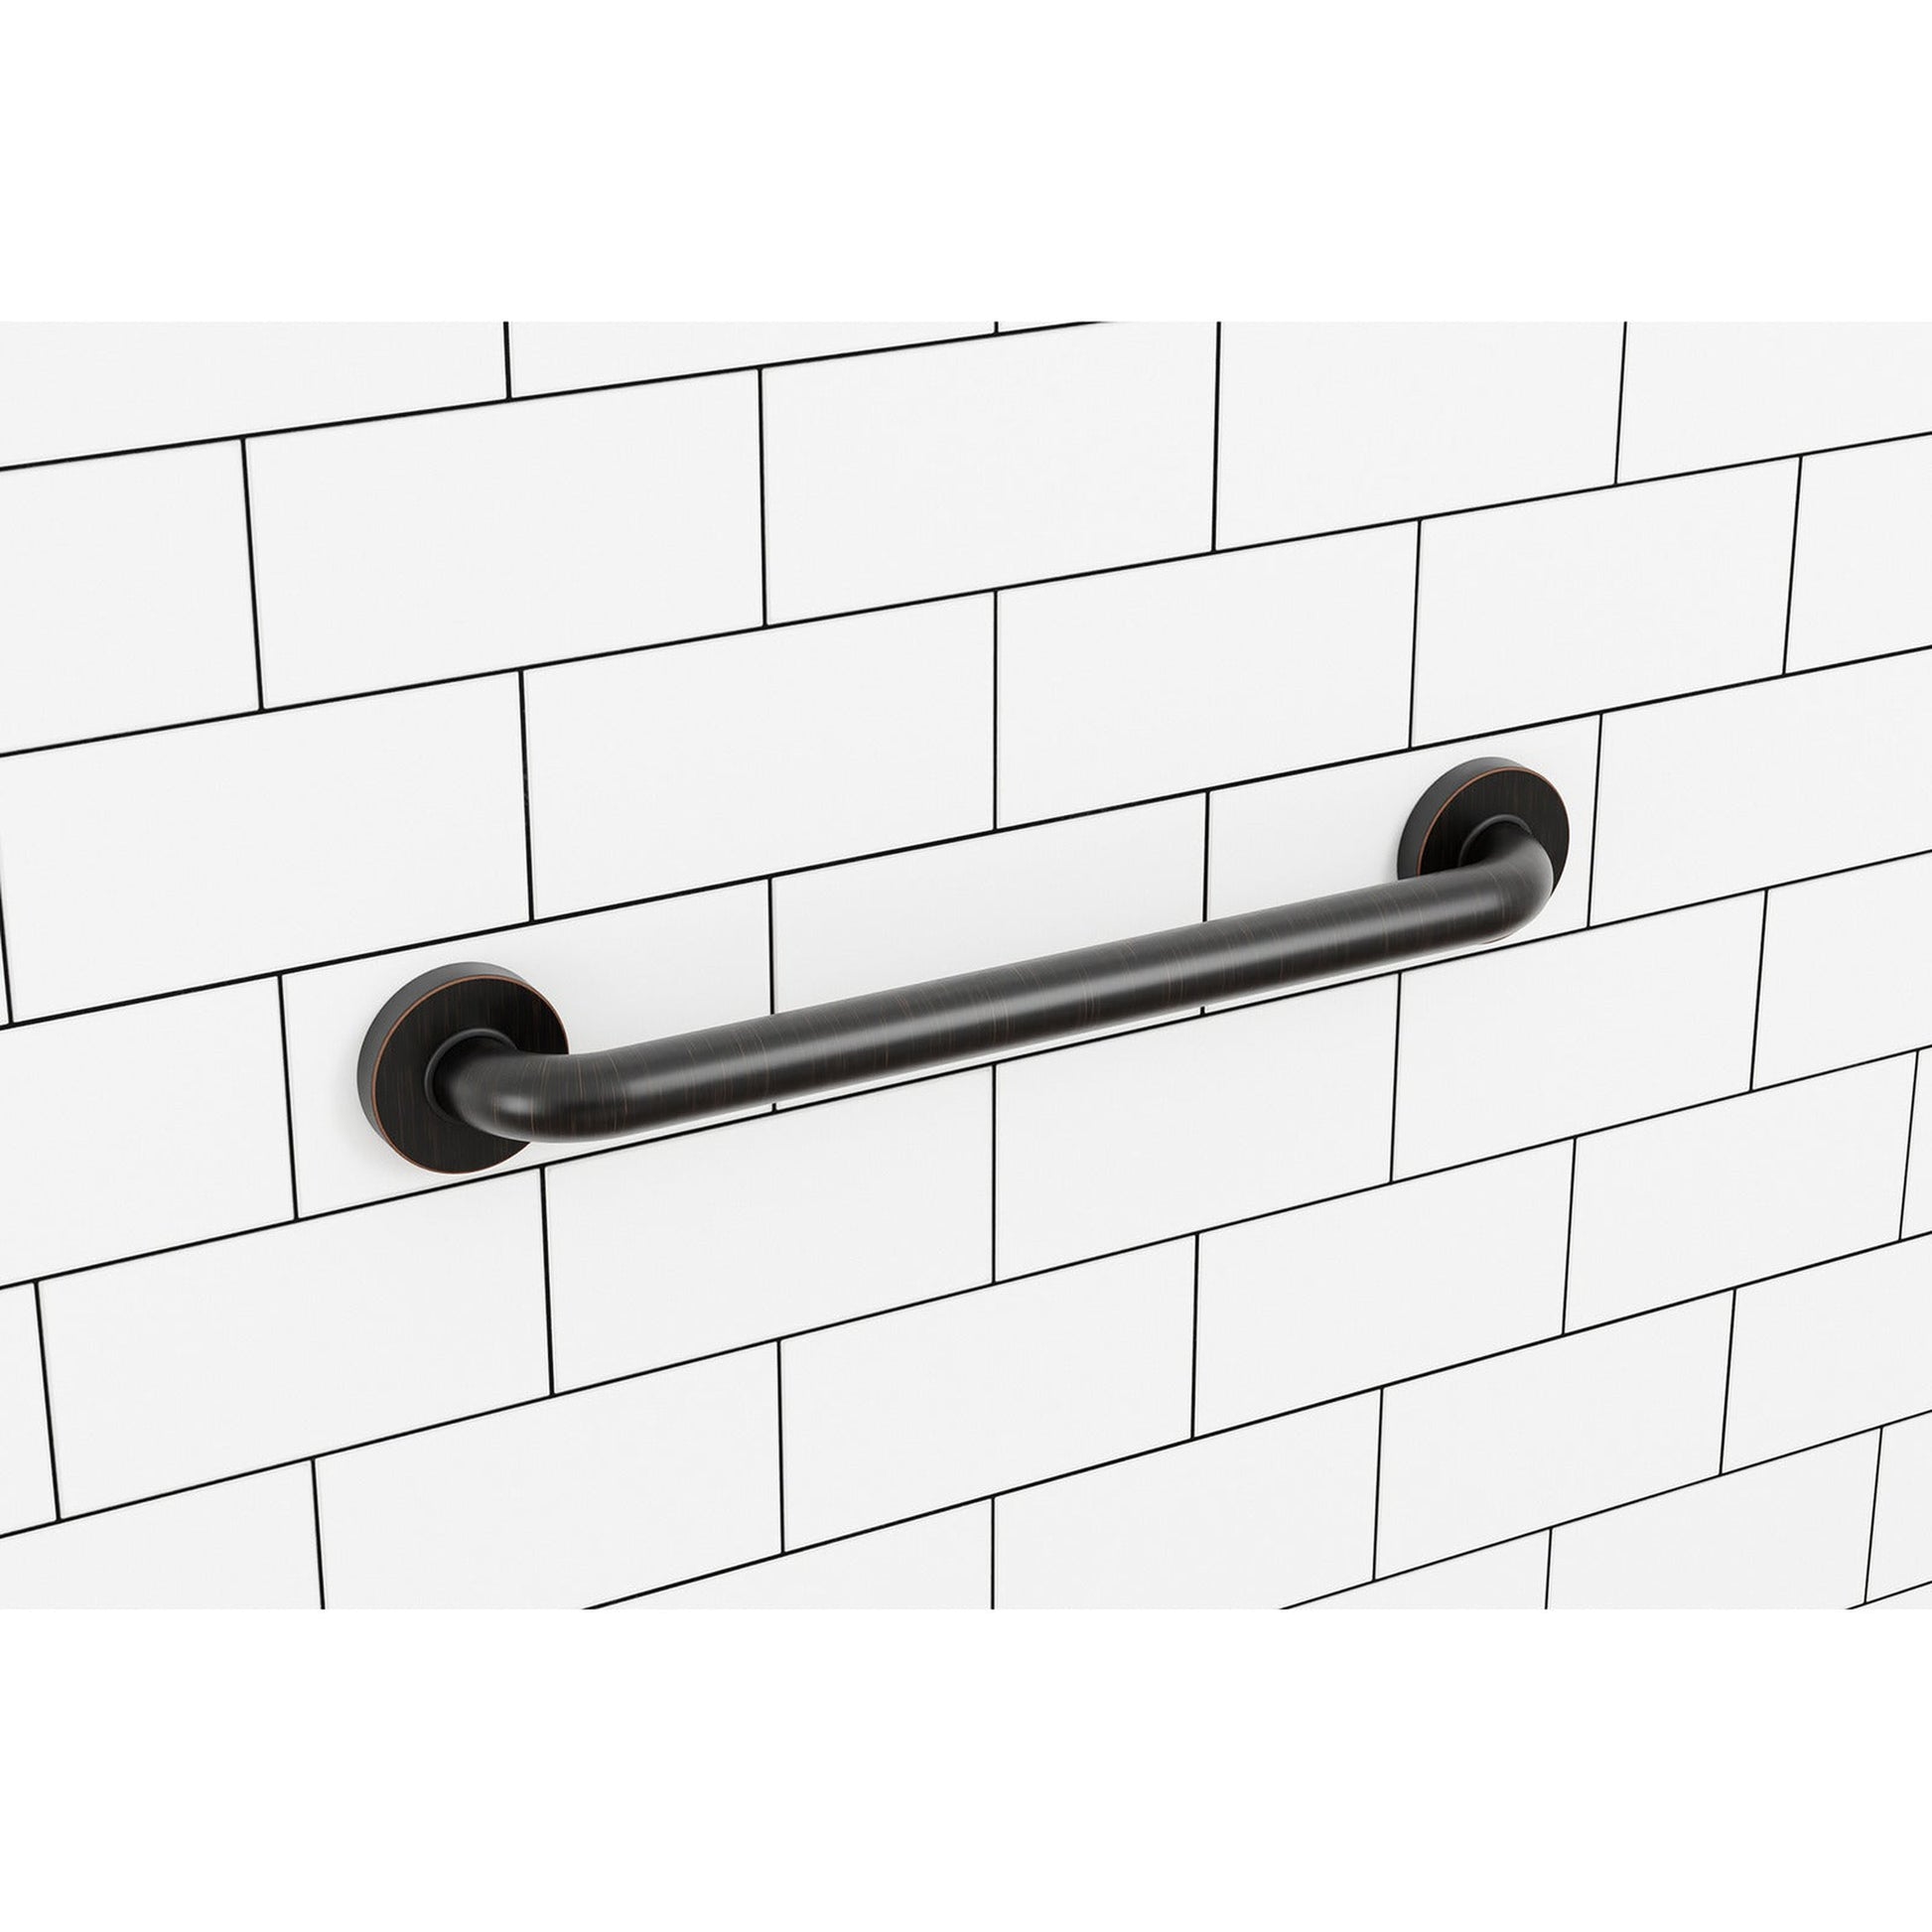 Evekare 18" x 1.25" Stainless Steel Concealed Mount Grab Bar in Oil Rubbed Bronze